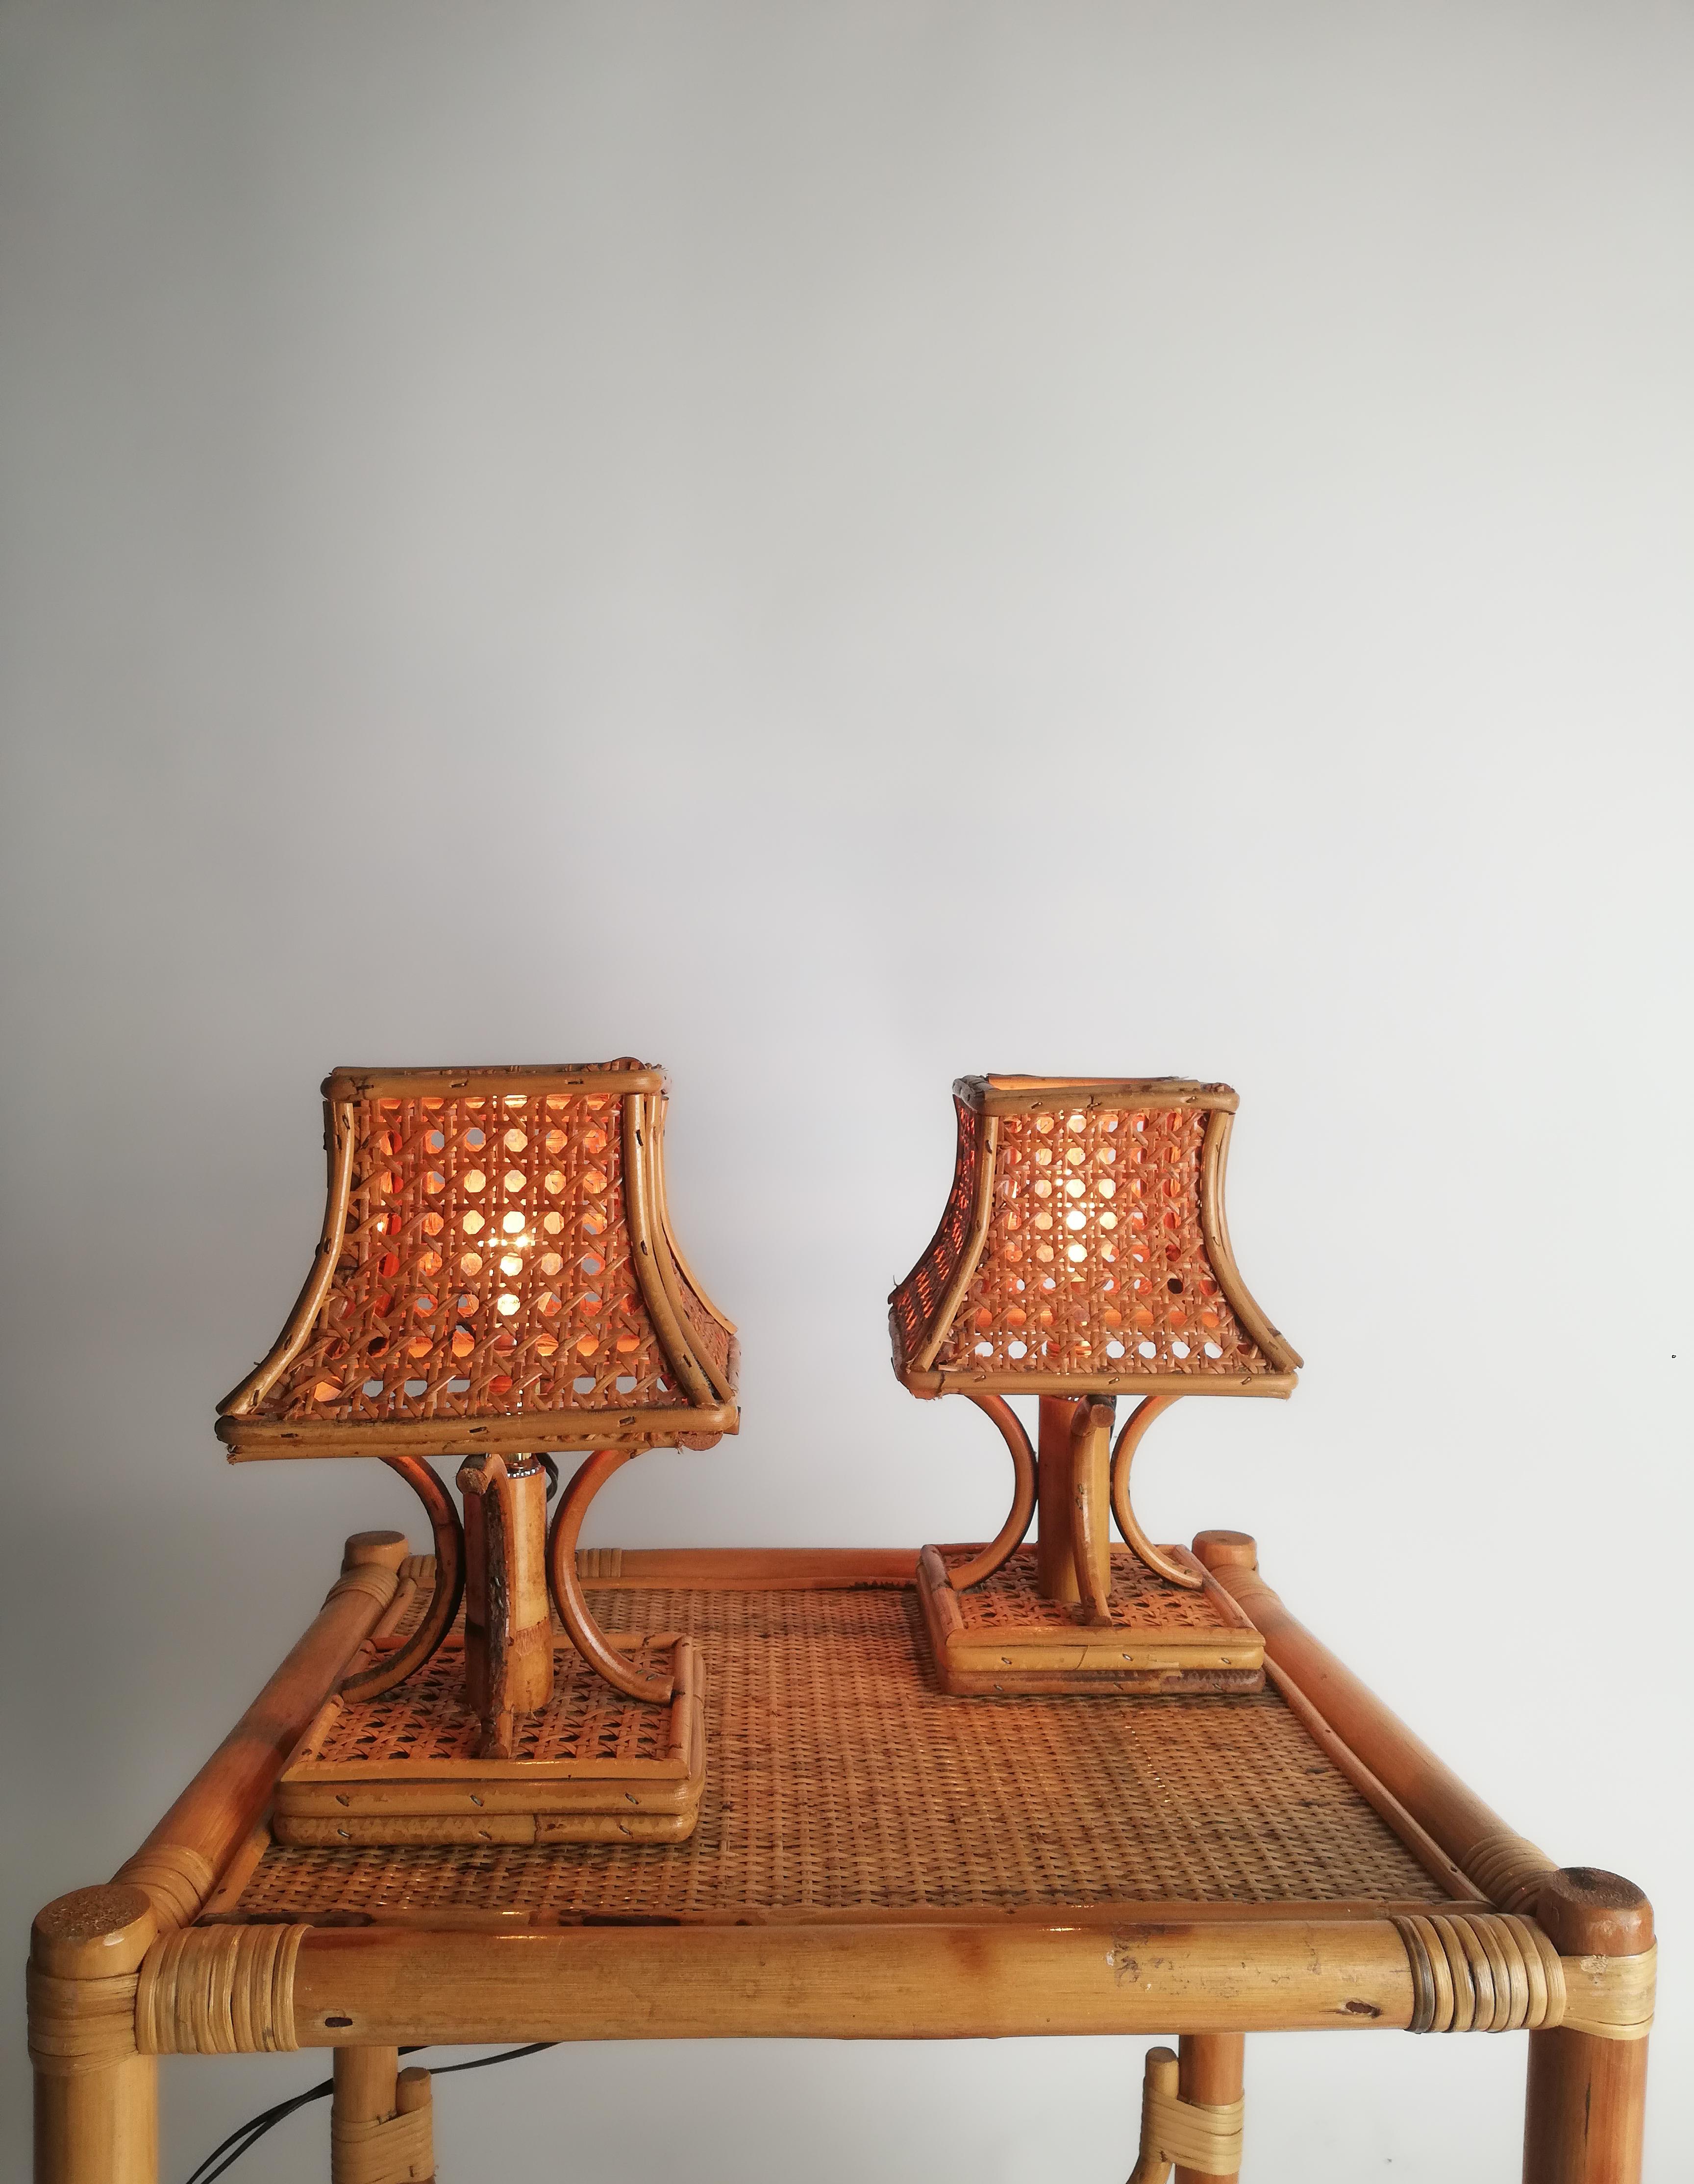 Set of 2 Midcentury Bedside Table Lamps in Rattan and Wicker Cane Webbing, Italy For Sale 4